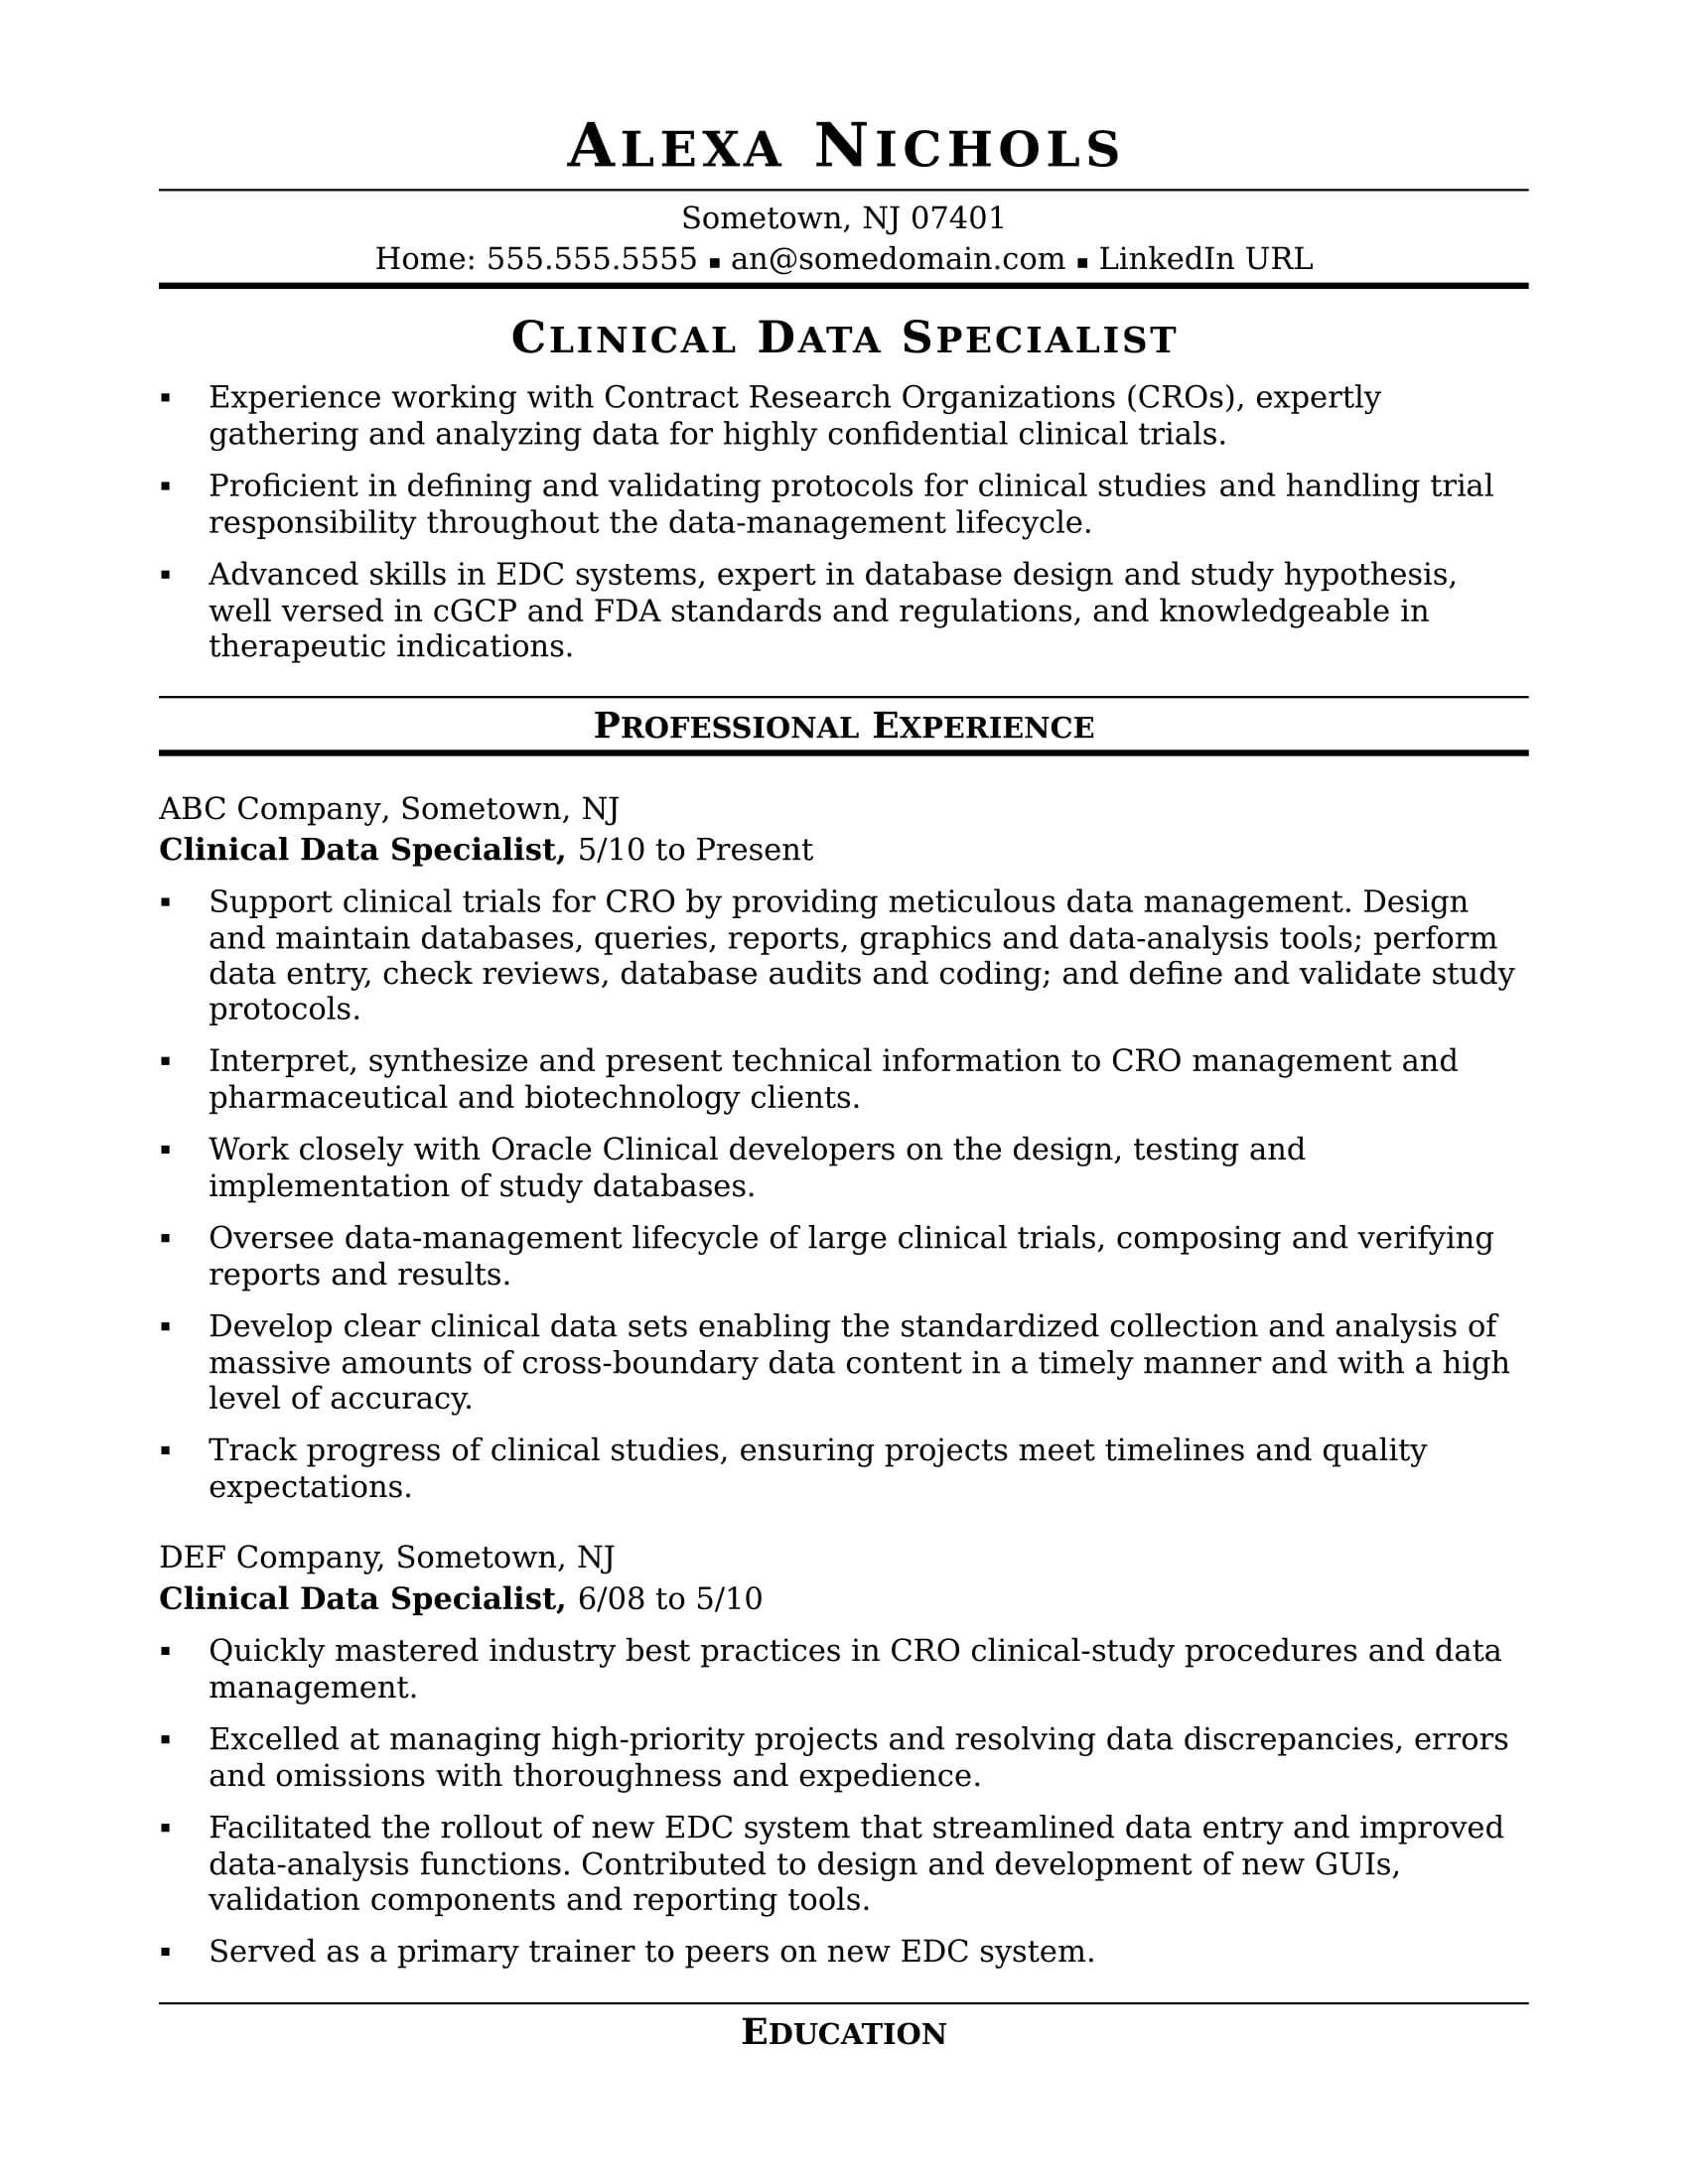 Sample Entry Clinical Research Coordinator Resume Clinical Data Specialist Resume Sample Monster.com